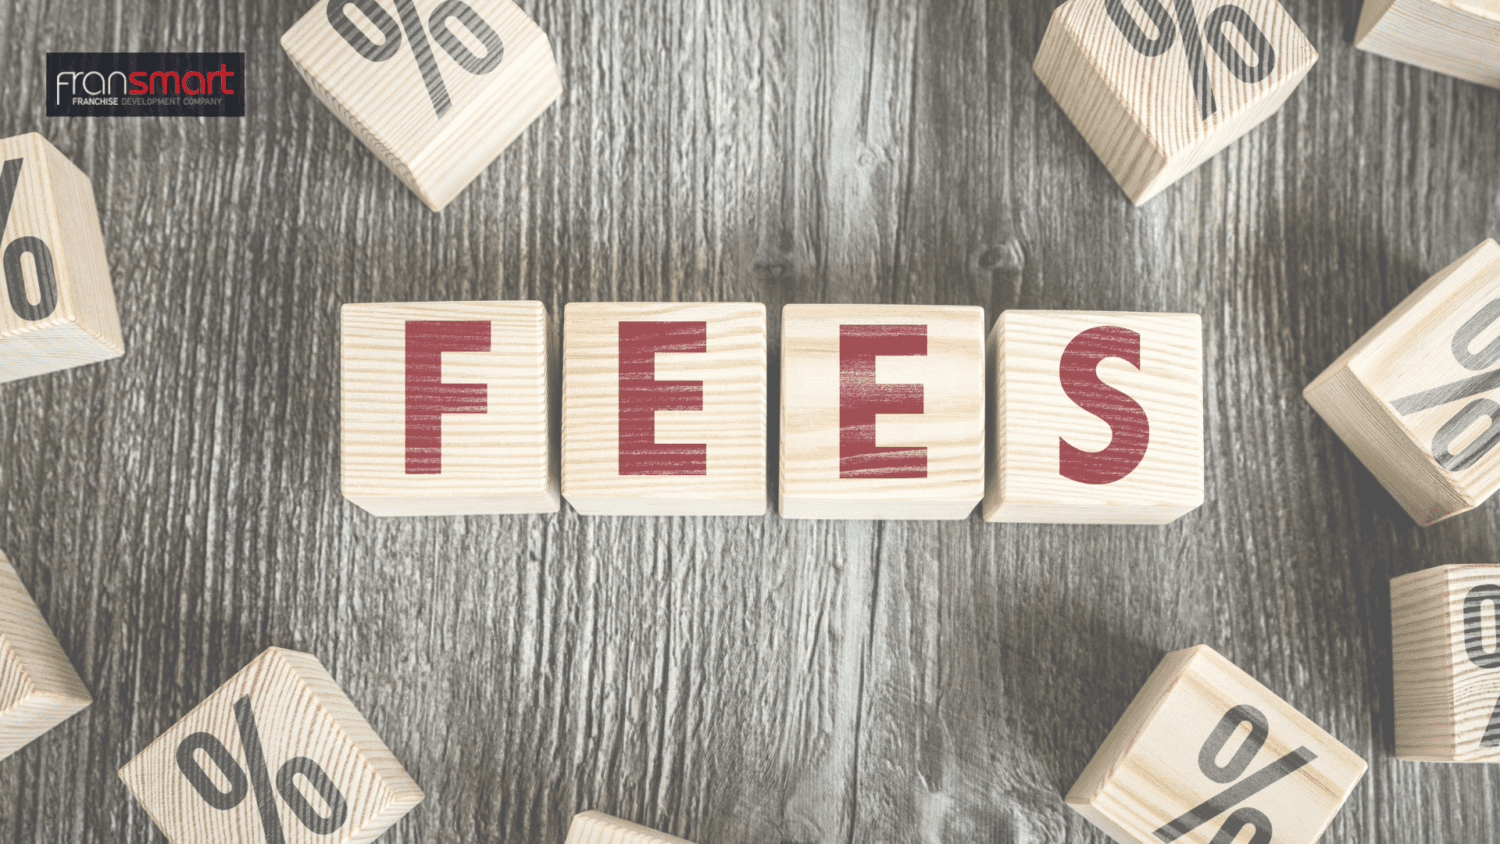 Royalty Fees Explained: What Franchisees Need to Know